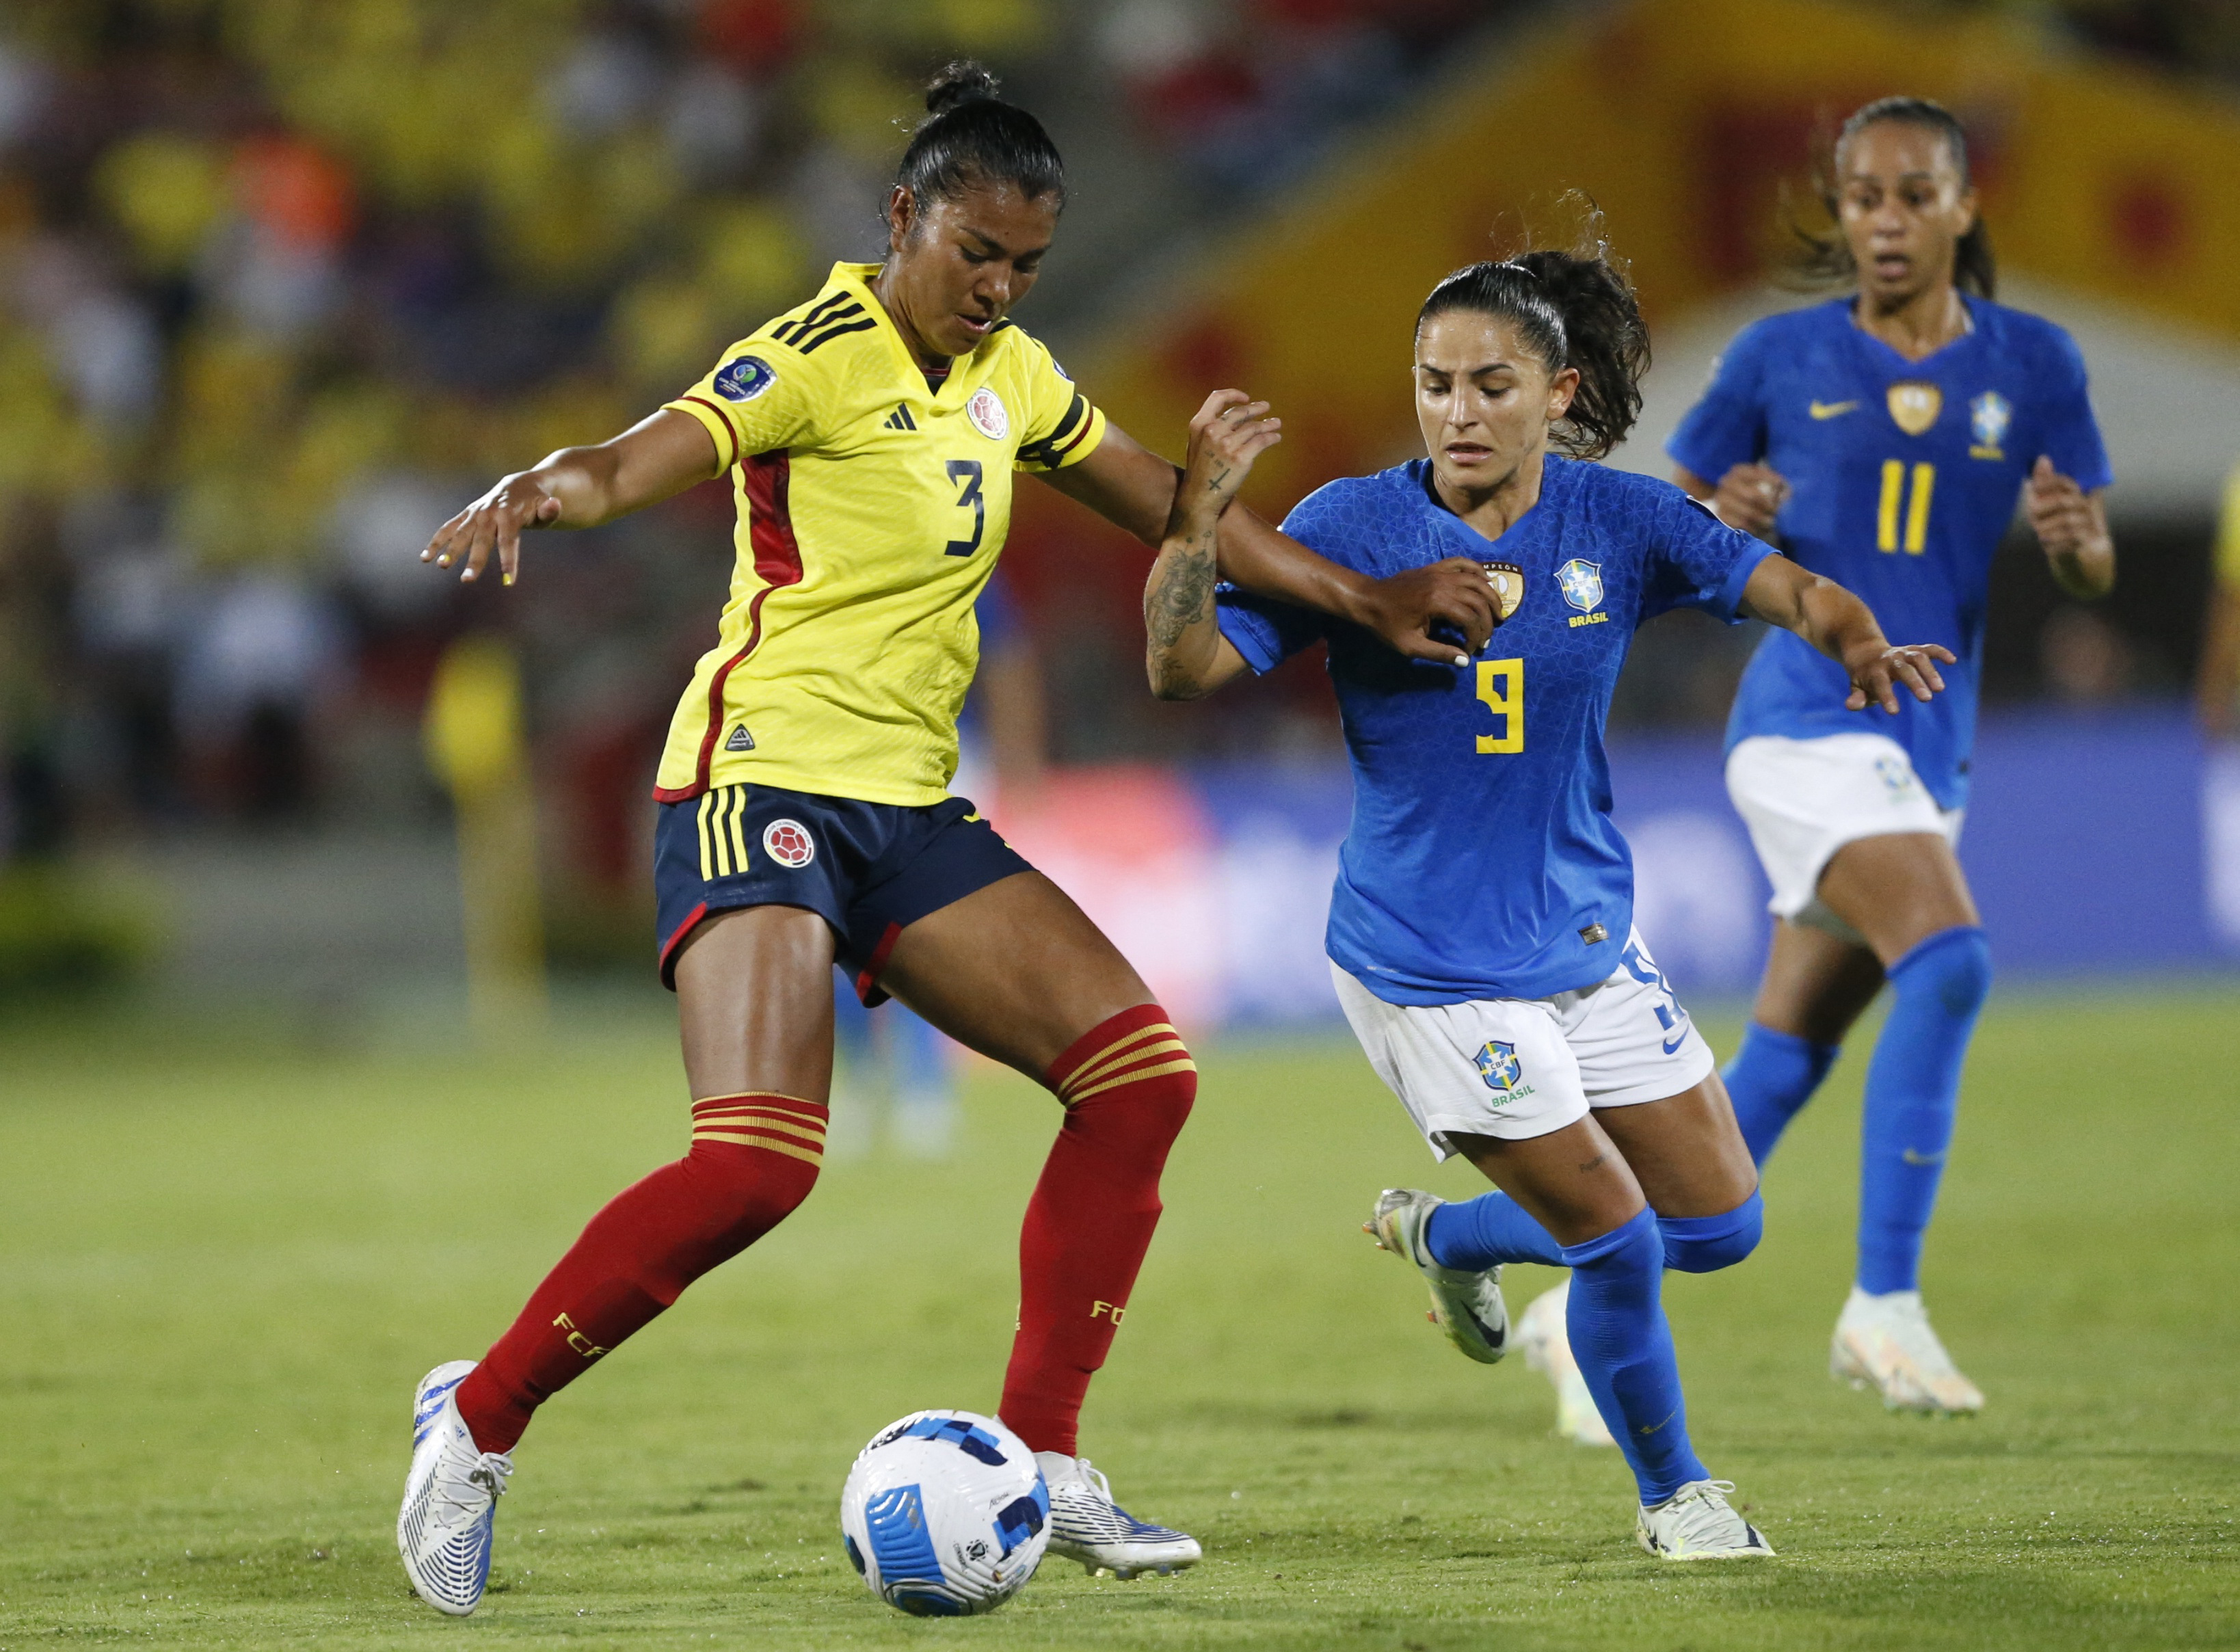 Soccer Football - Women's Copa America - Final - Colombia v Brazil - Estadio Alfonso Lopez, Bucaramanga, Colombia - July 30, 2022 Colombia's Daniela Arias in action with Brazil's Debinha REUTERS/Mariana Greif